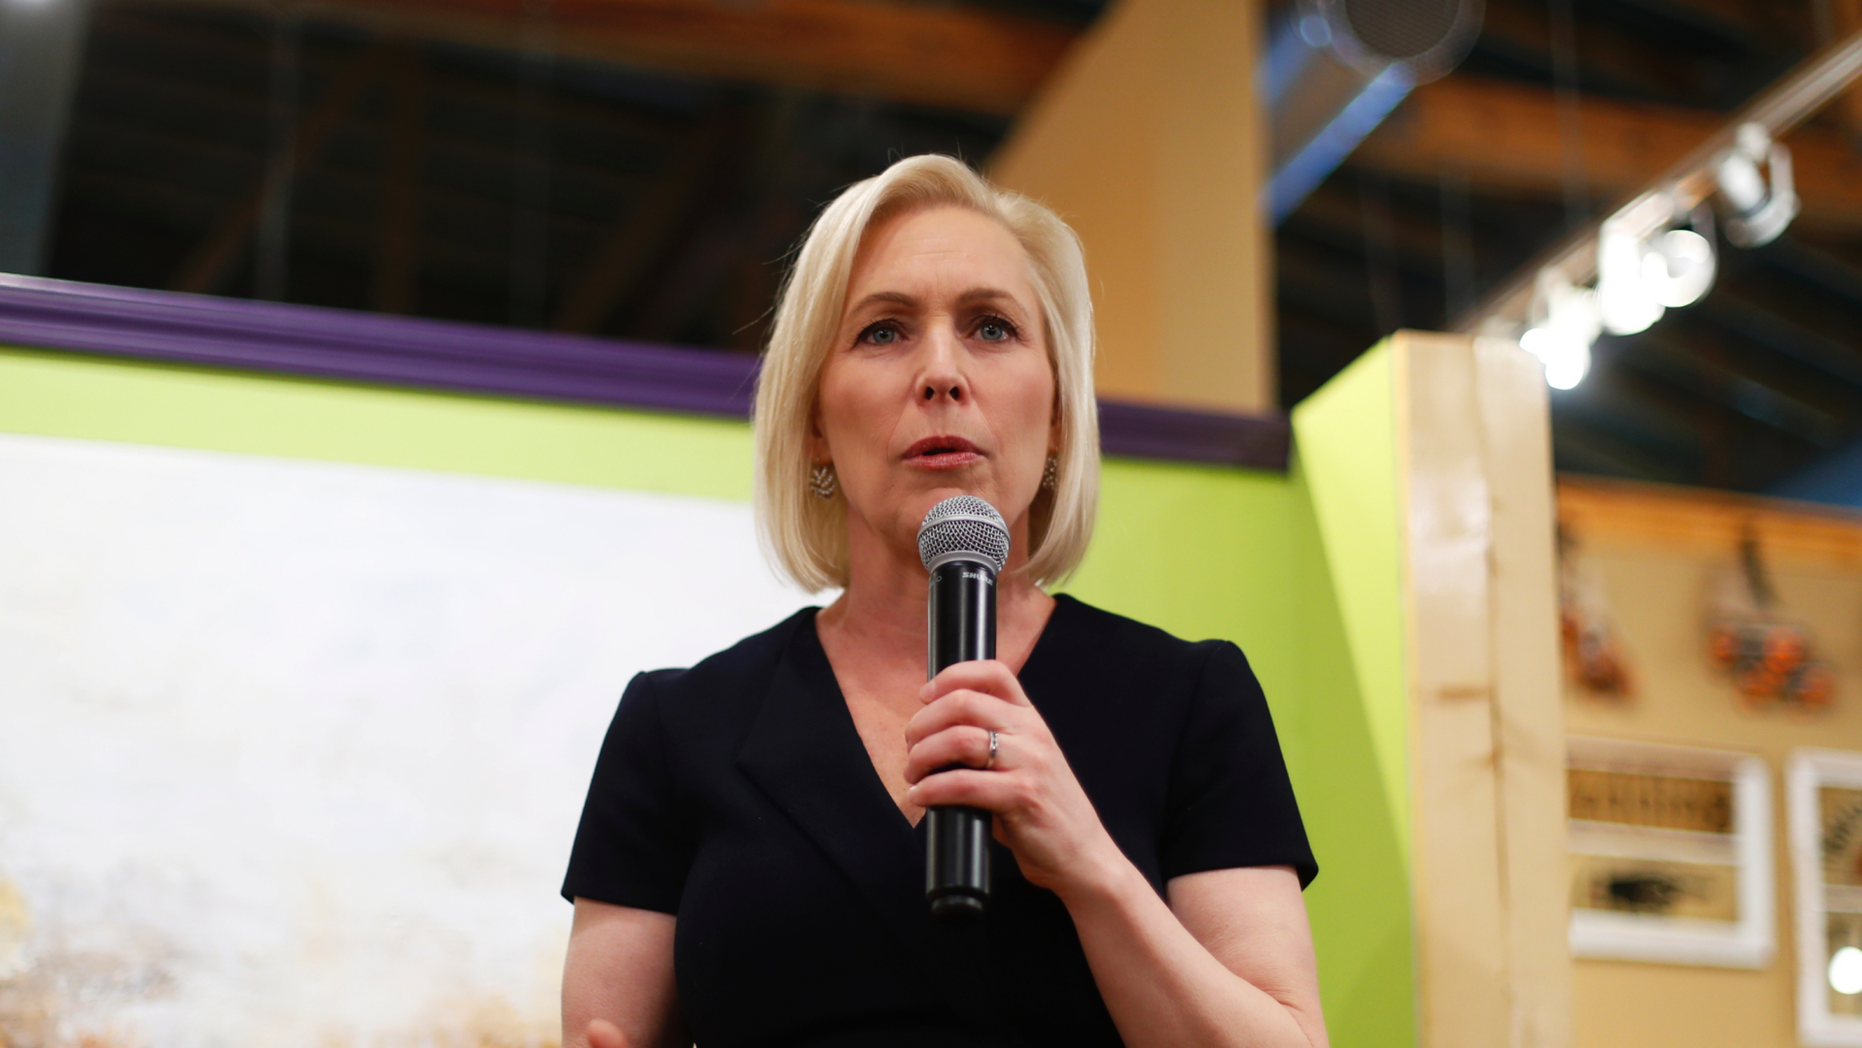 On Monday, March 18, 2019, photo, Democratic presidential candidate Kirsten Gillibrand, DN.Y., speaks at an election meeting in Clawson, Michigan. Gillibrand prepares to speak on Sunday at Trump International Hotel & amp; New York tour. (AP Photo / Paul Sancya)